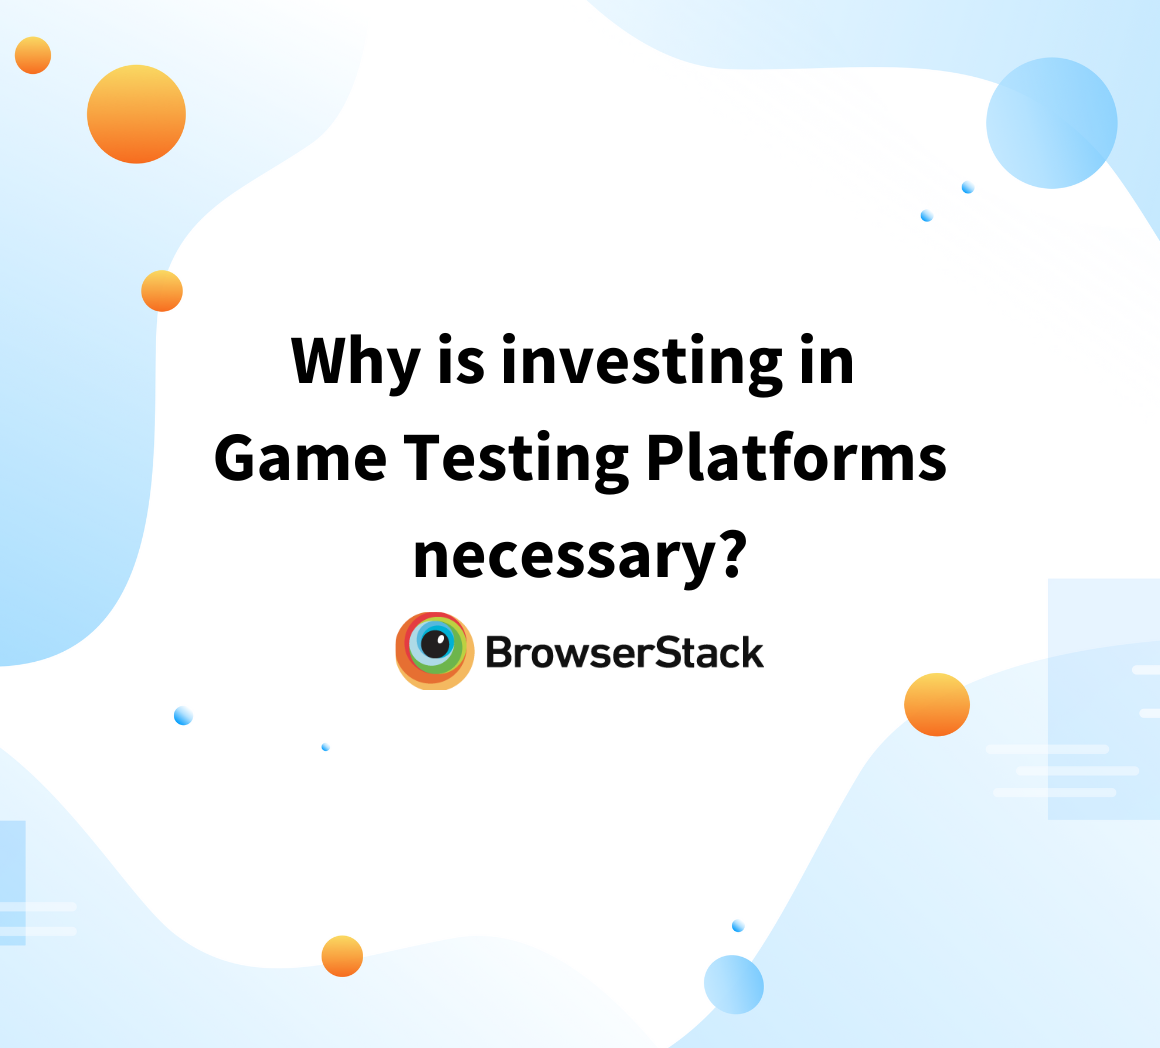 Why is investing in Game Testing Platforms necessary